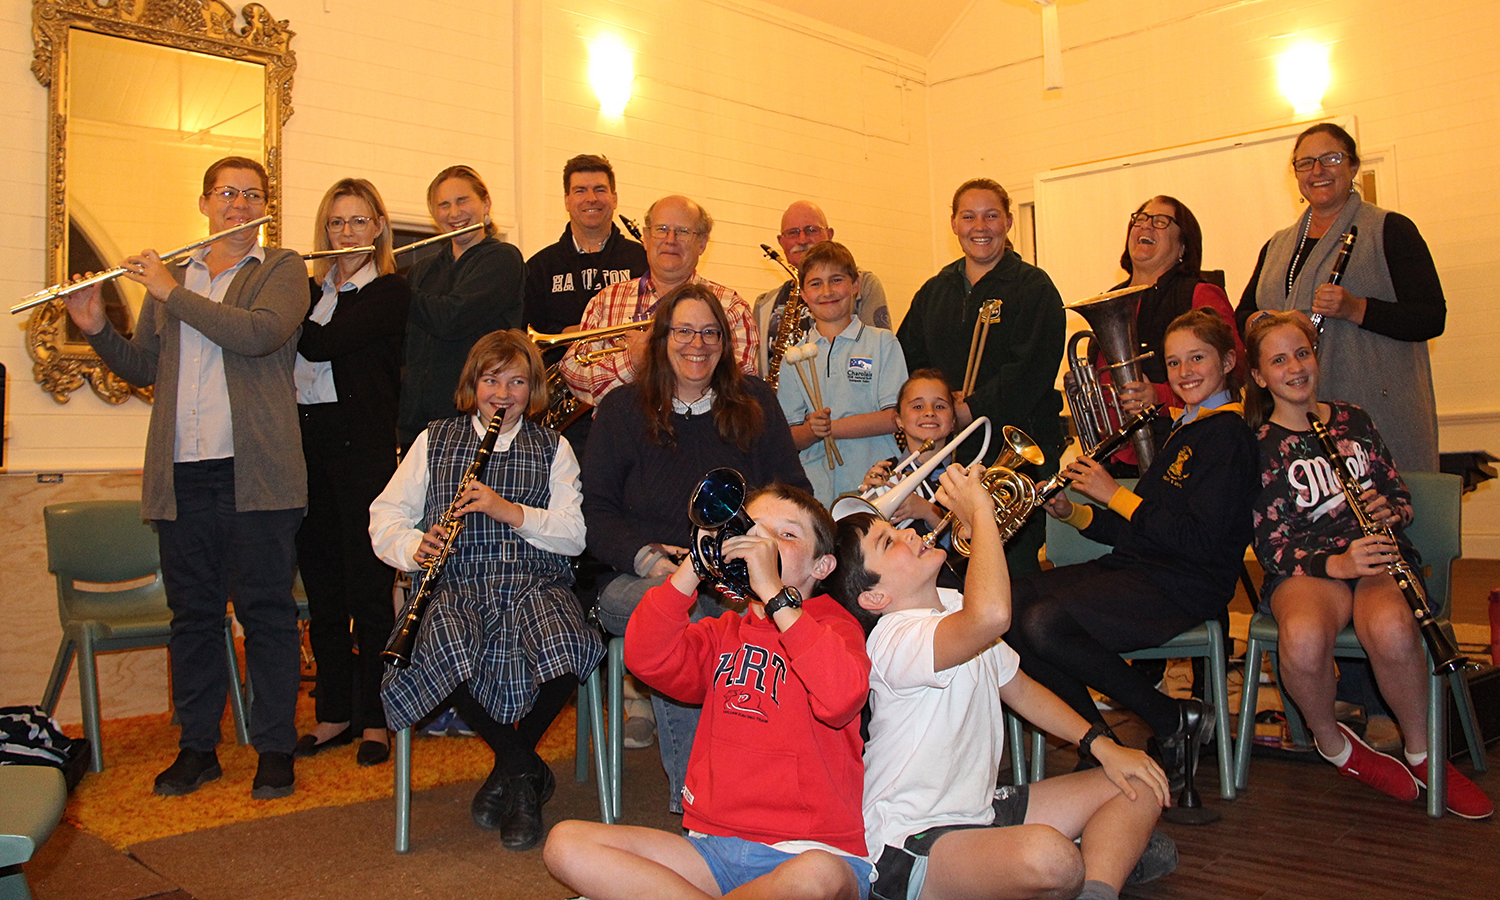 The Power of Music in Wee Waa – community band strikes a chord